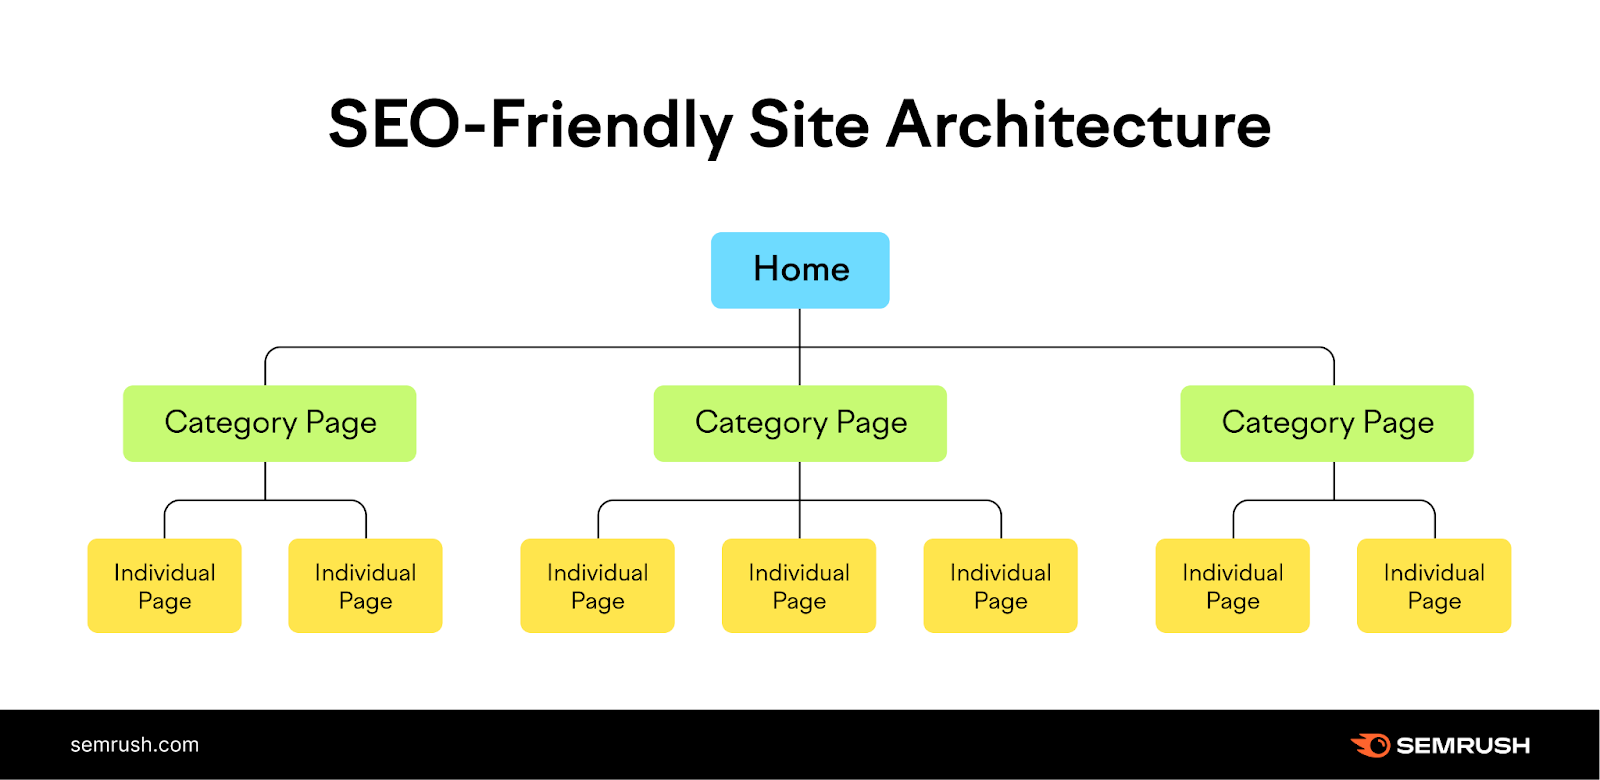 an infographic by Semrush showing an SEO-friendly site architecture